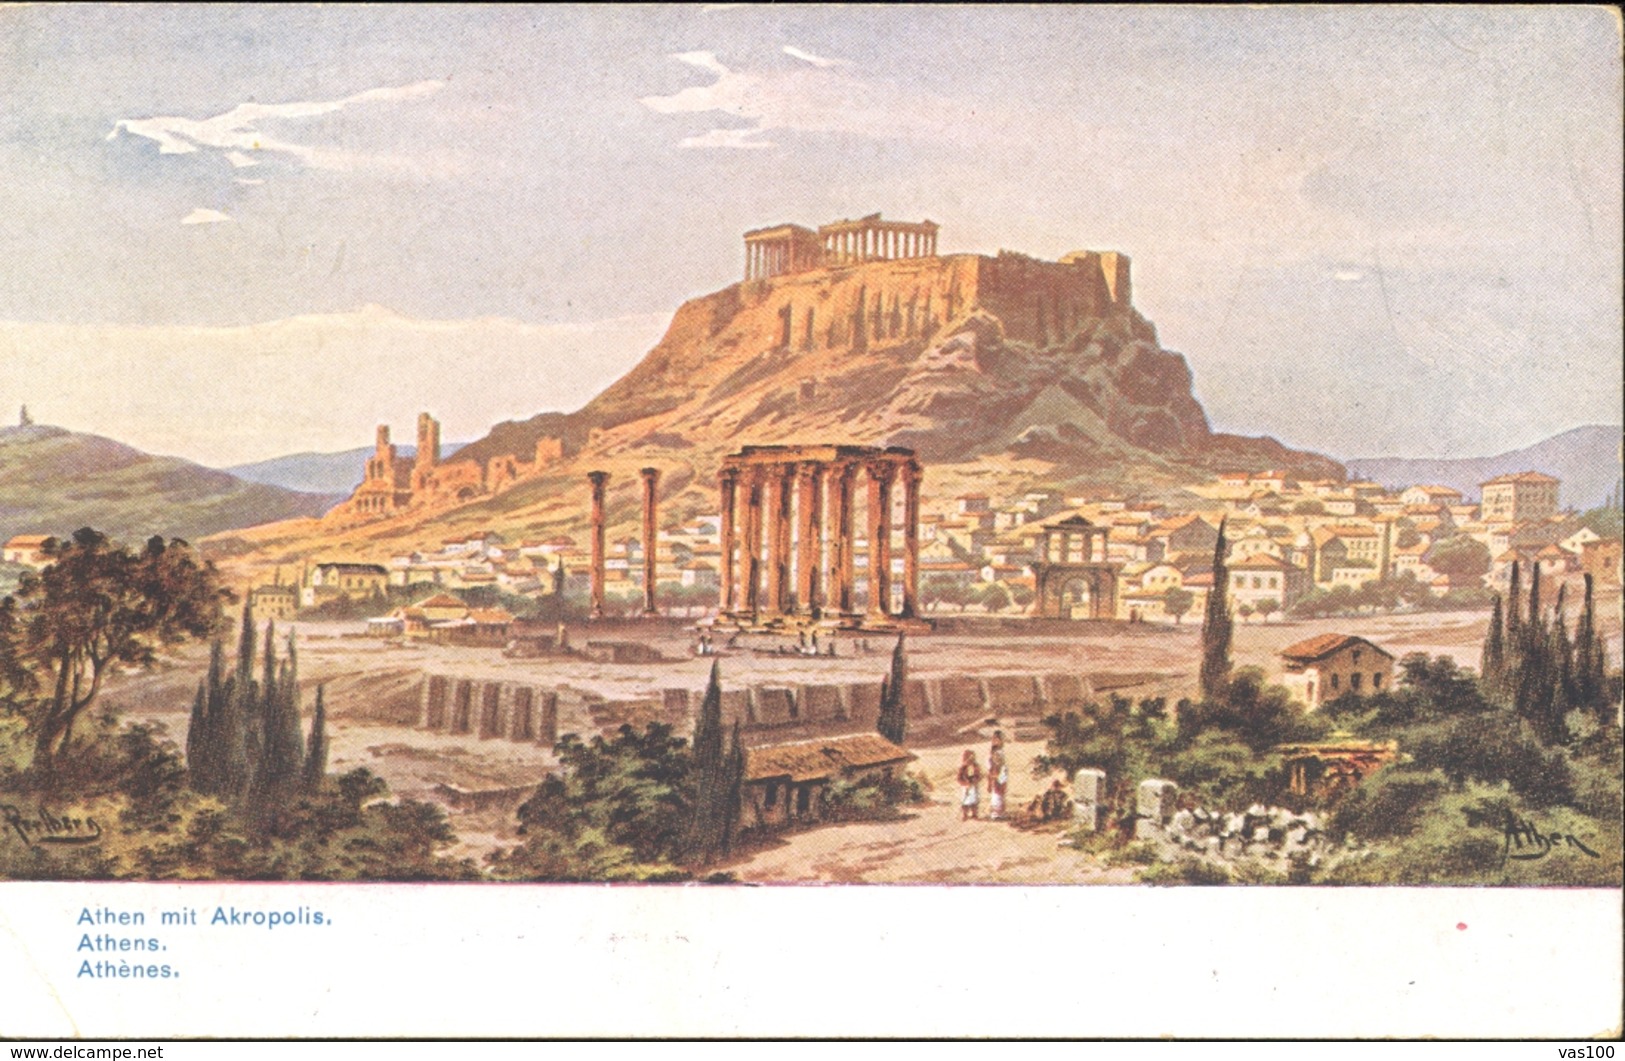 CPA SIGNED ILLUSTRATION, F. PERLBERG- ATHENS WITH THE ACROPOLIS - Perlberg, F.